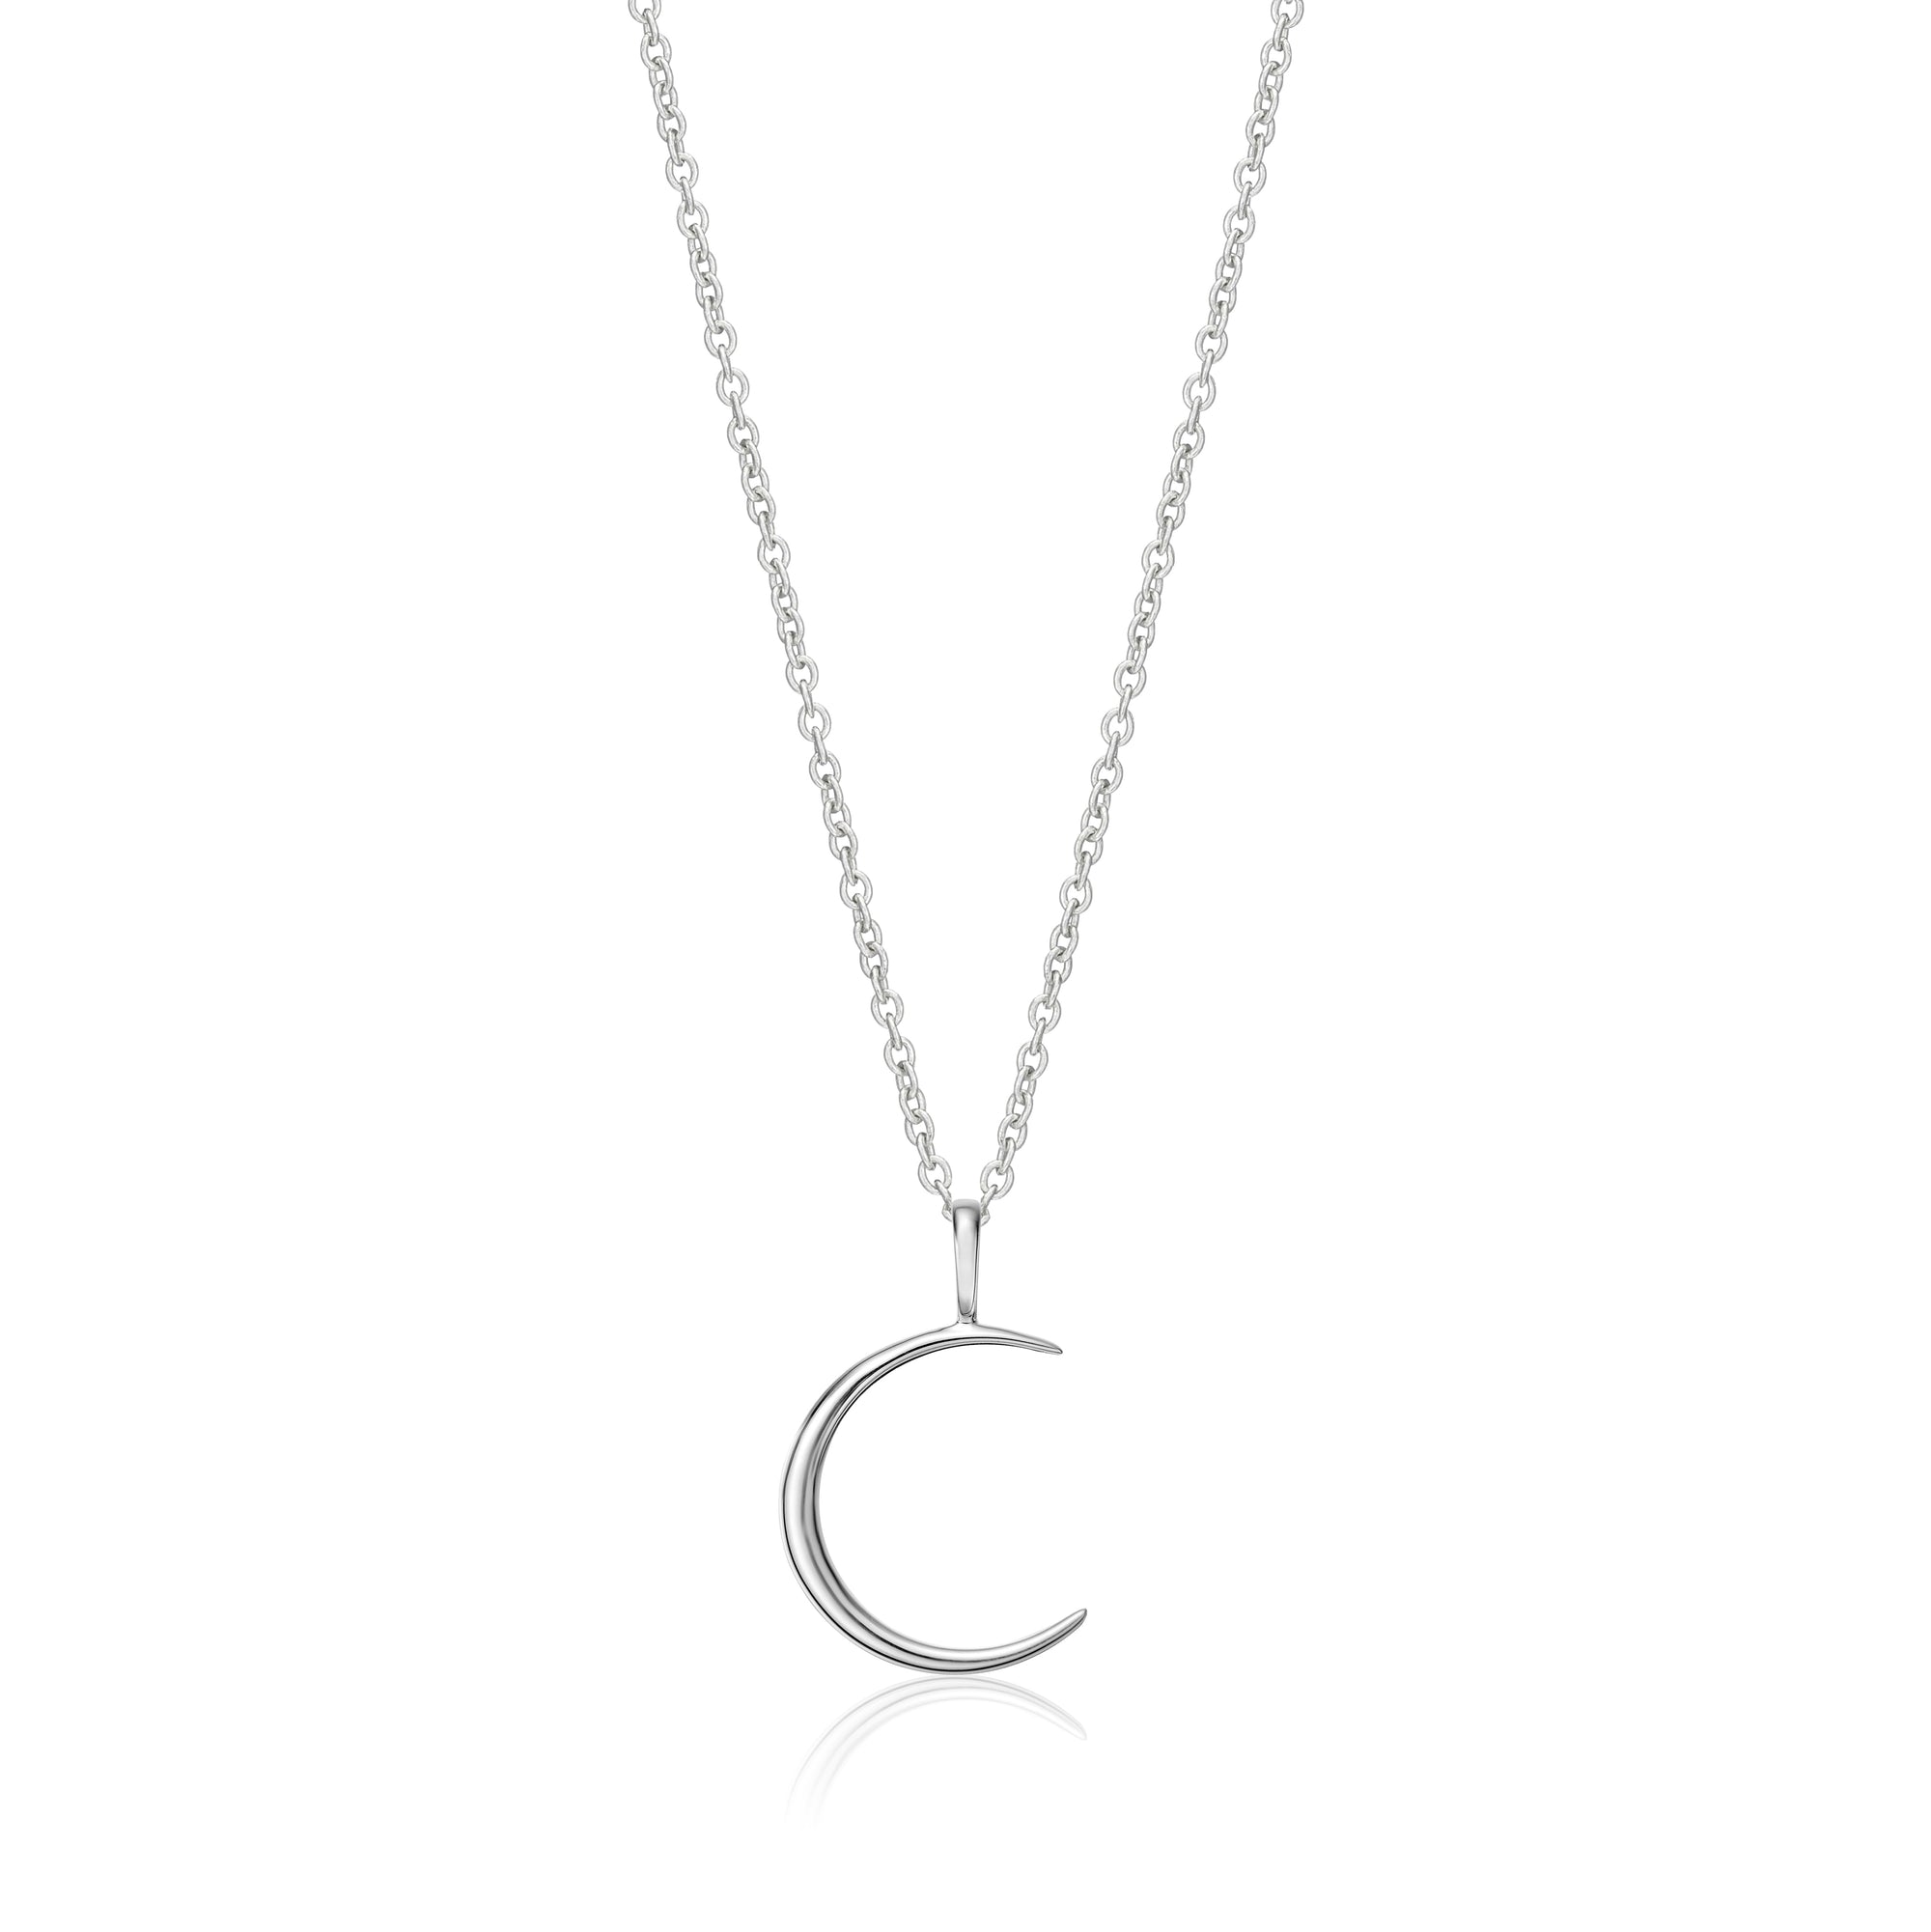 Crescent Moon Necklace